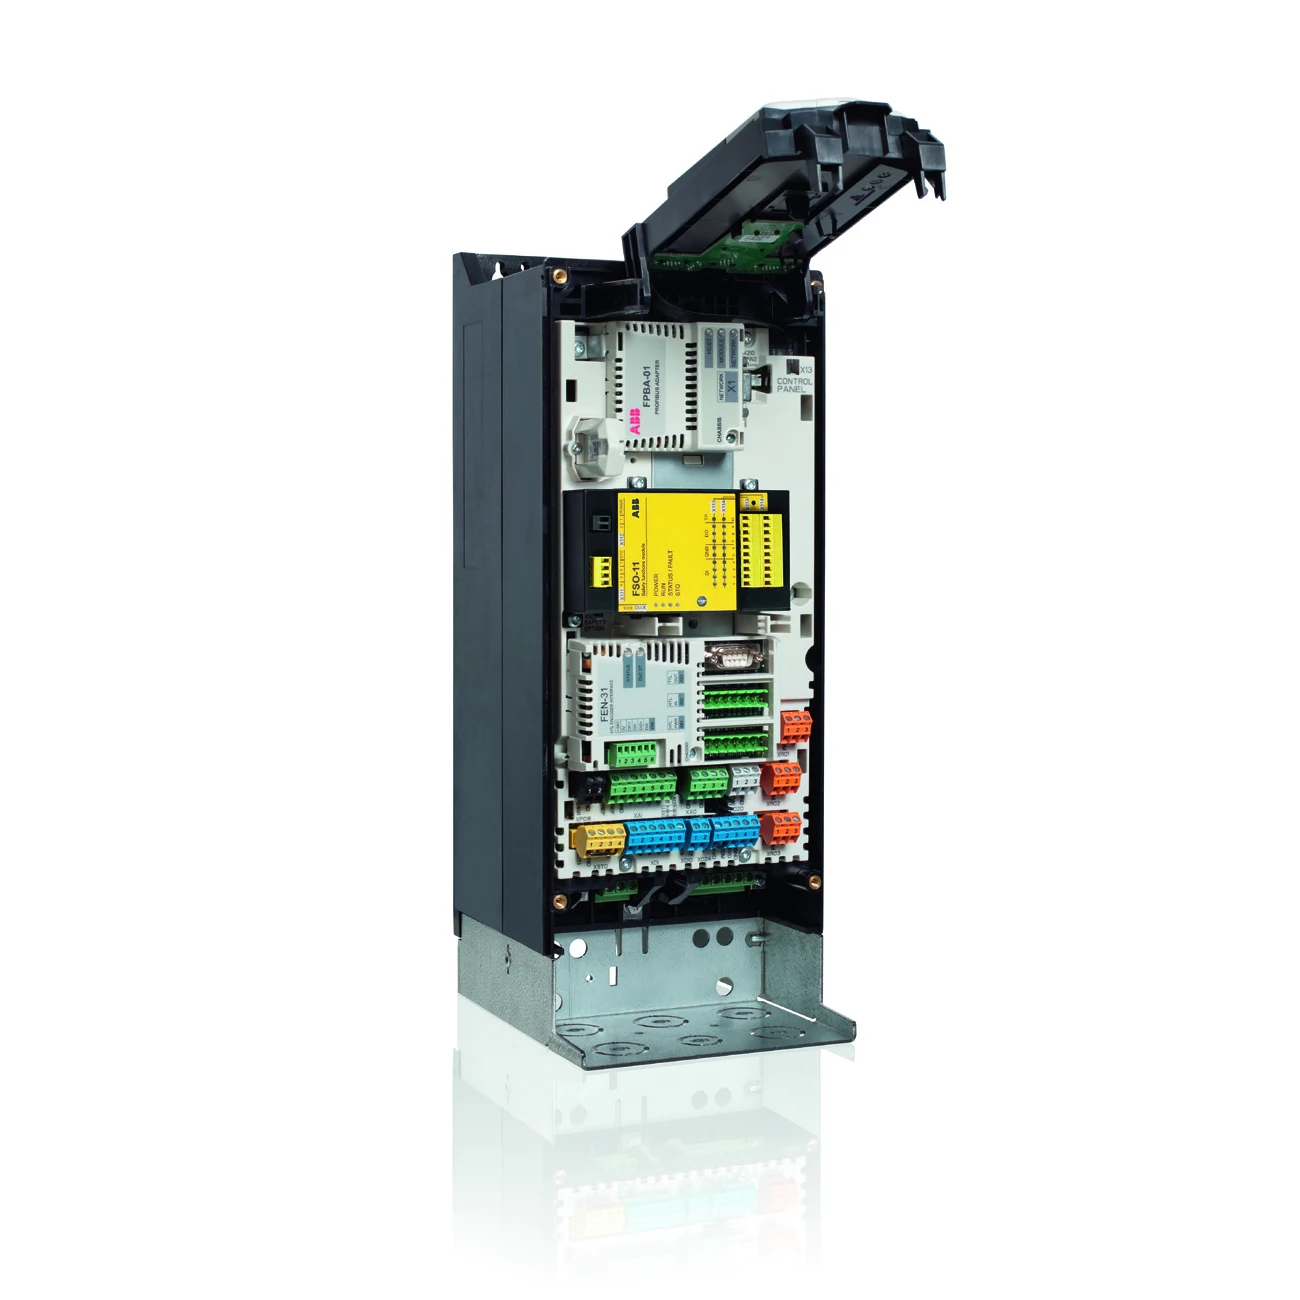 ACS880-01 wall-mounted drives Industrial drive Multilingual Factory original AC380 0.75KW ACS880-01-02A4-3